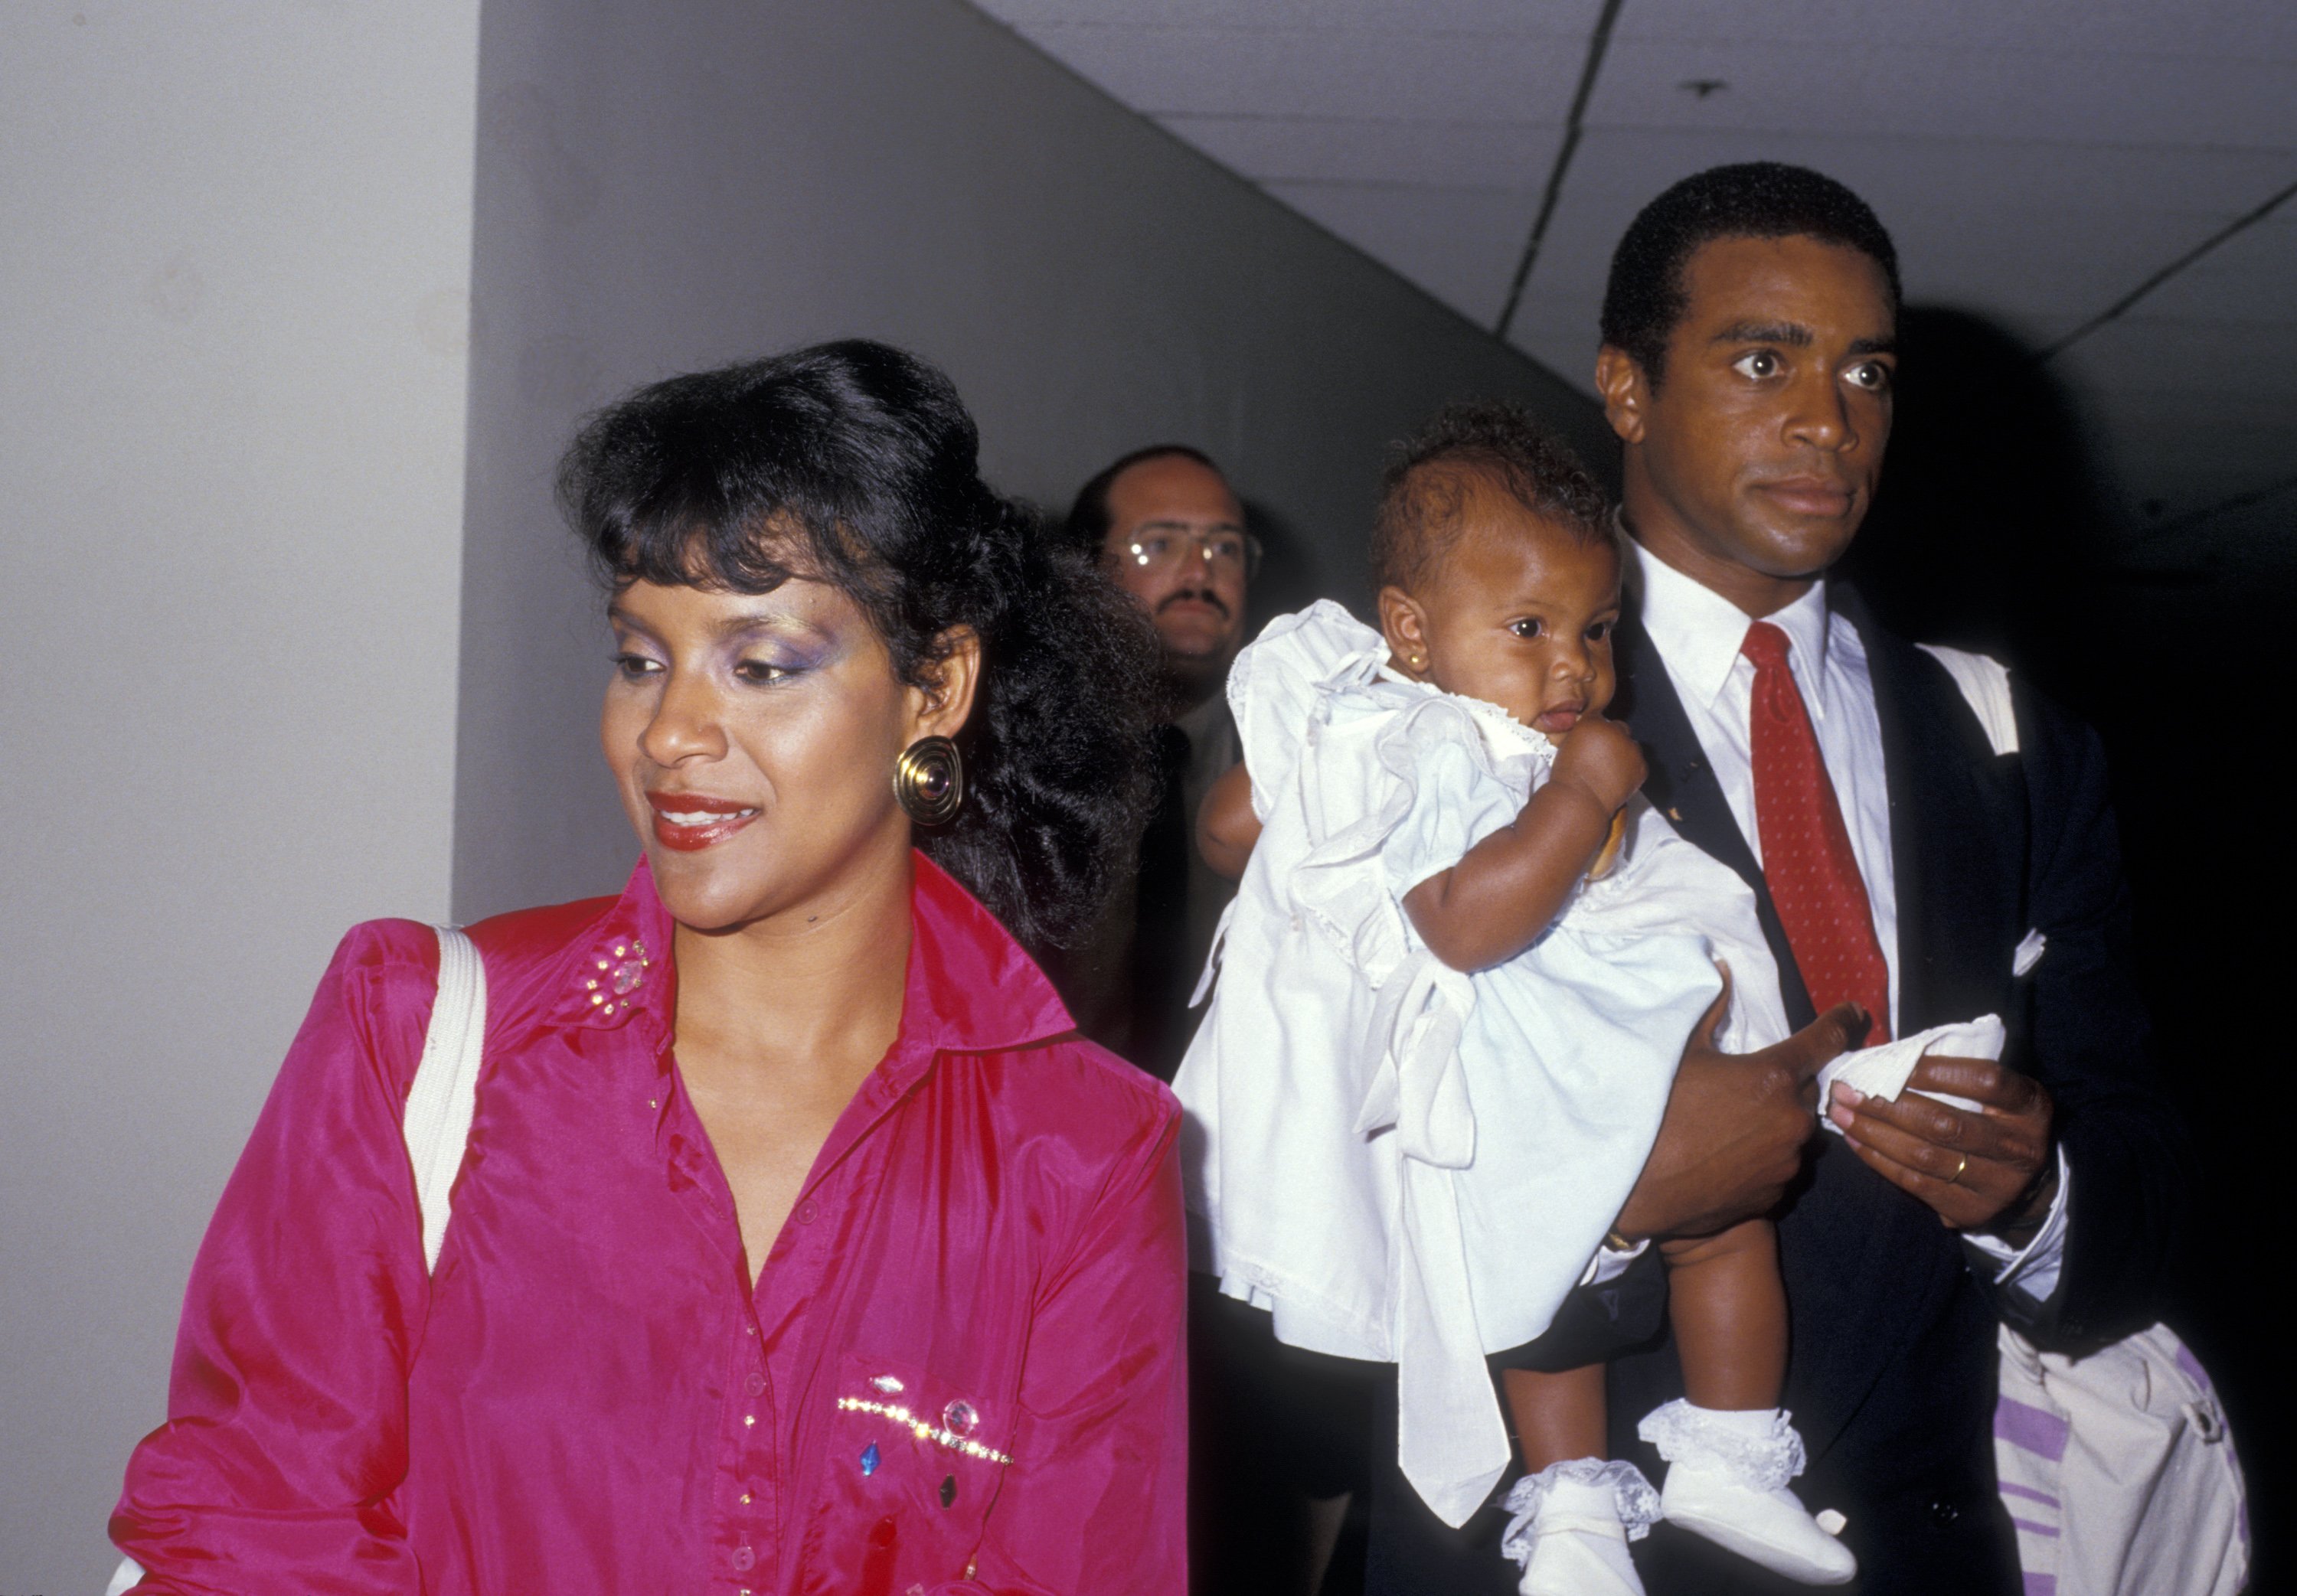 Phylicia and Ahmad Rashad with their daughter Condola Rashad at the NBC Affiliates Party on June 2, 1987, in California | Source: Getty Images 